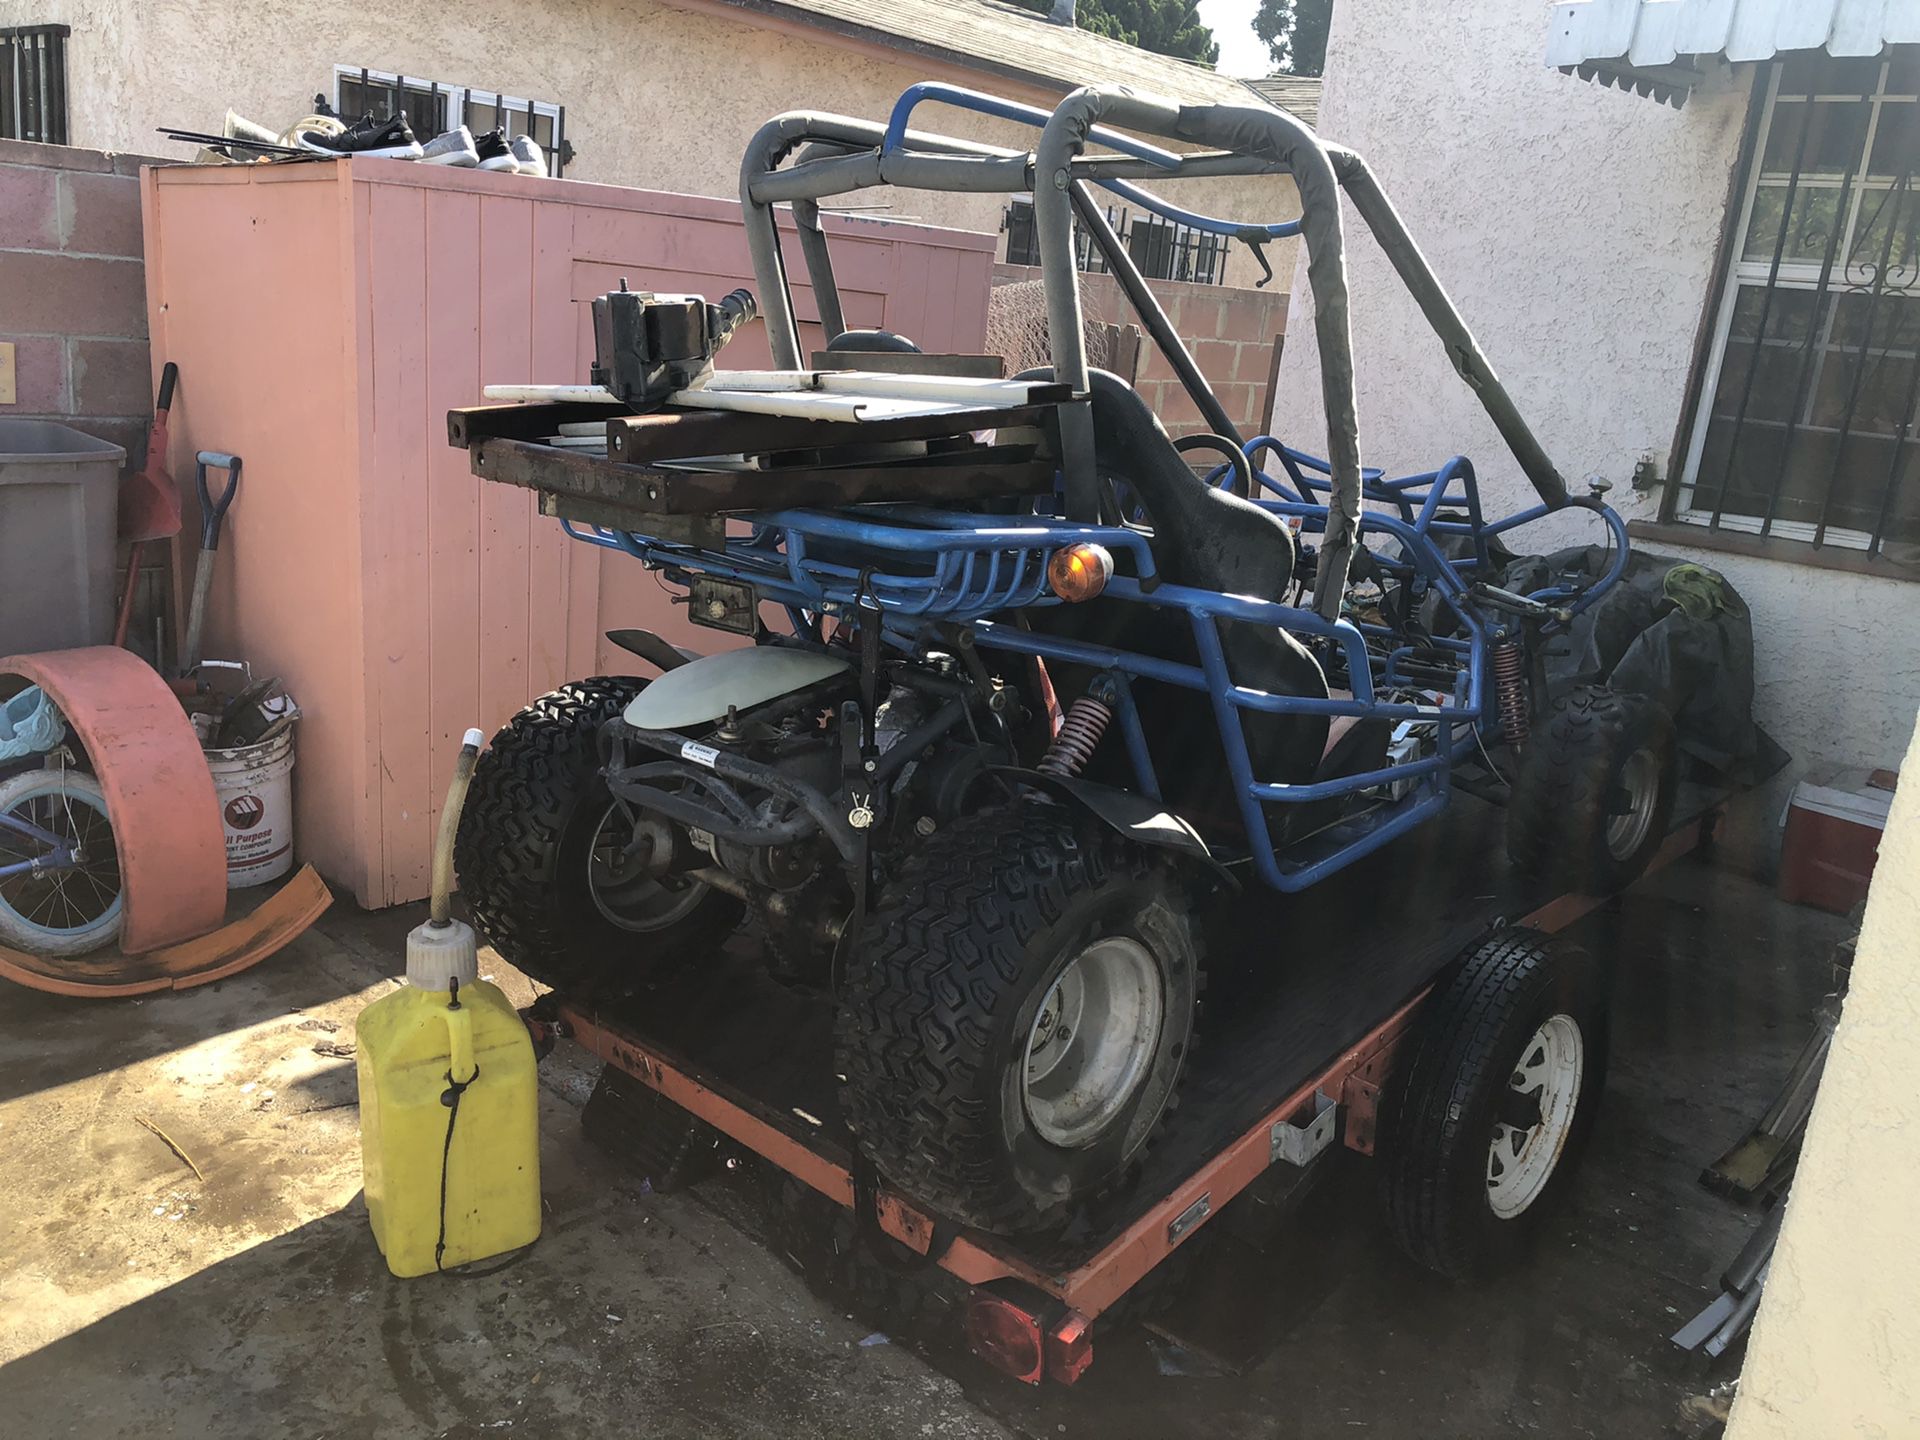 go kart for adults 150cc 2 seater it fun for off-roading or to be in farms $1300 it comes with a trailer lmk when ur ready to pick up or trade for a